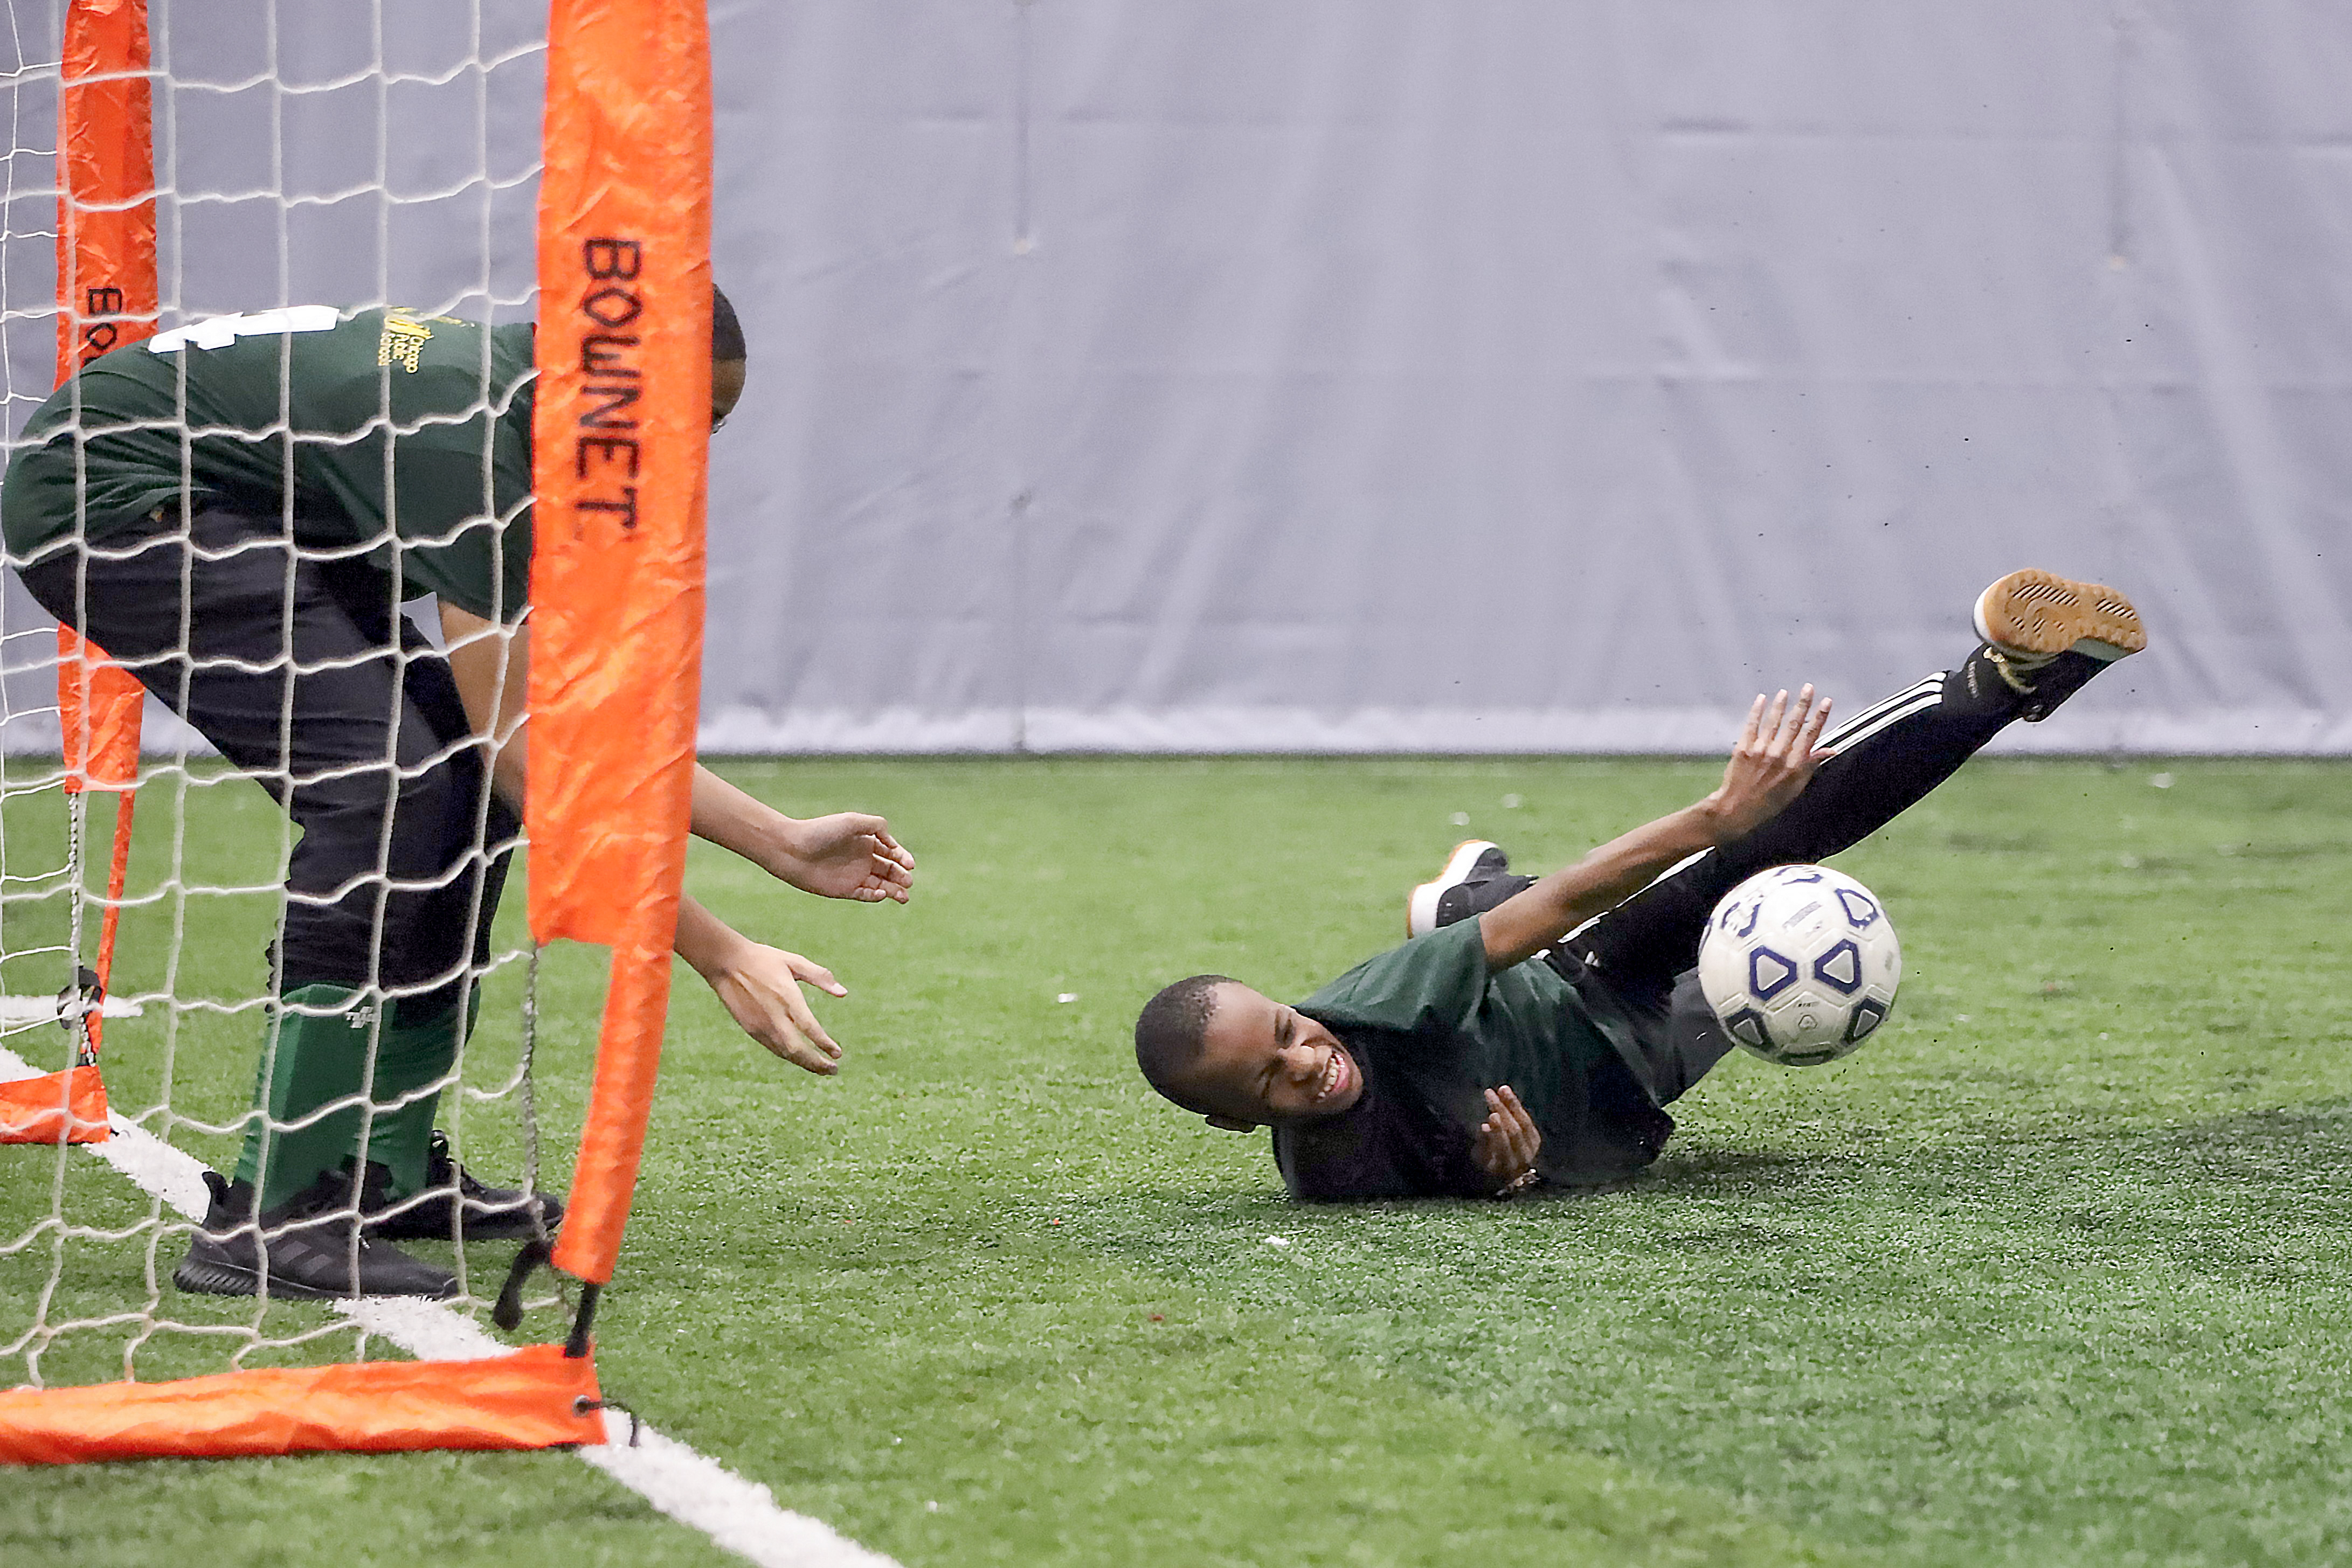 Kenneth dives towards the ball in trying to help his goalie, Kristian, save a goal at the Pullman Community Center soccer tournament held on February 8, 2023. Kenneth and Kristian are both 8th graders at Mahalia Jackson Elementary School. (Photo by Kelly Jankowski)